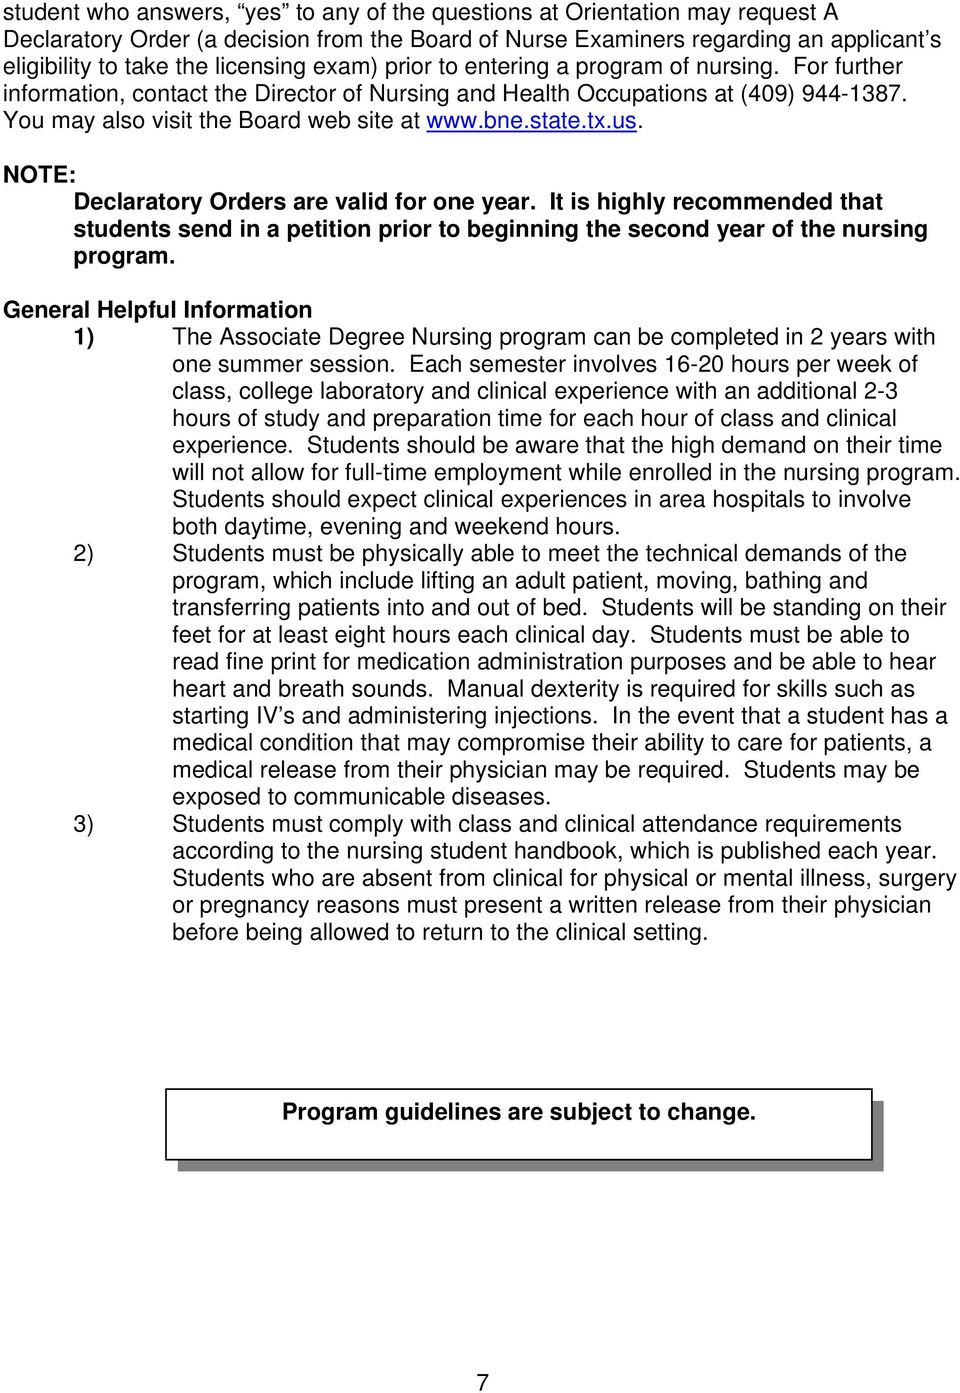 bne.state.tx.us. NOTE: Declaratory Orders are valid for one year. It is highly recommended that students send in a petition prior to beginning the second year of the nursing program.